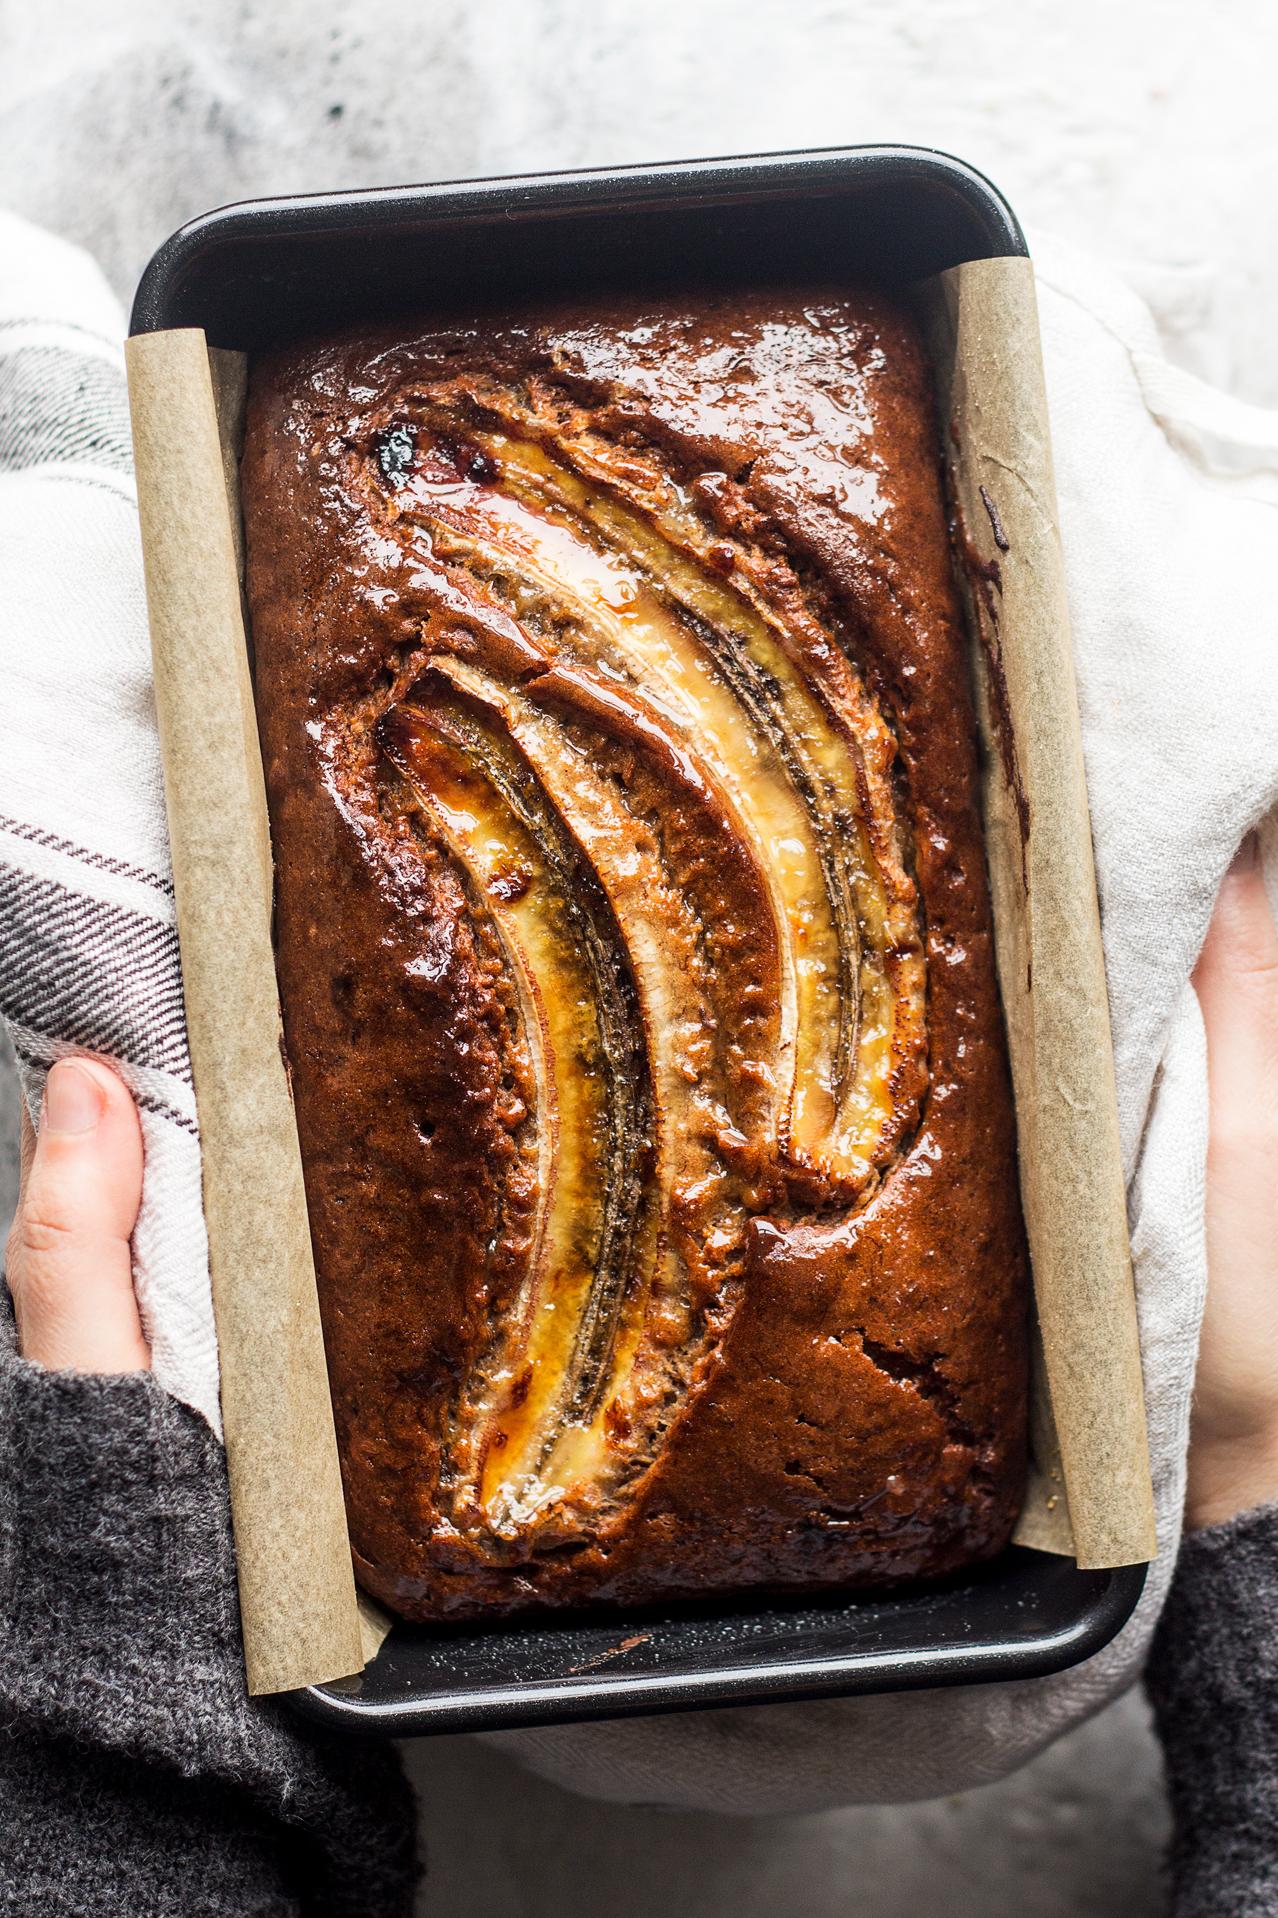  This is what happiness looks like: a loaf of coffee banana bread.